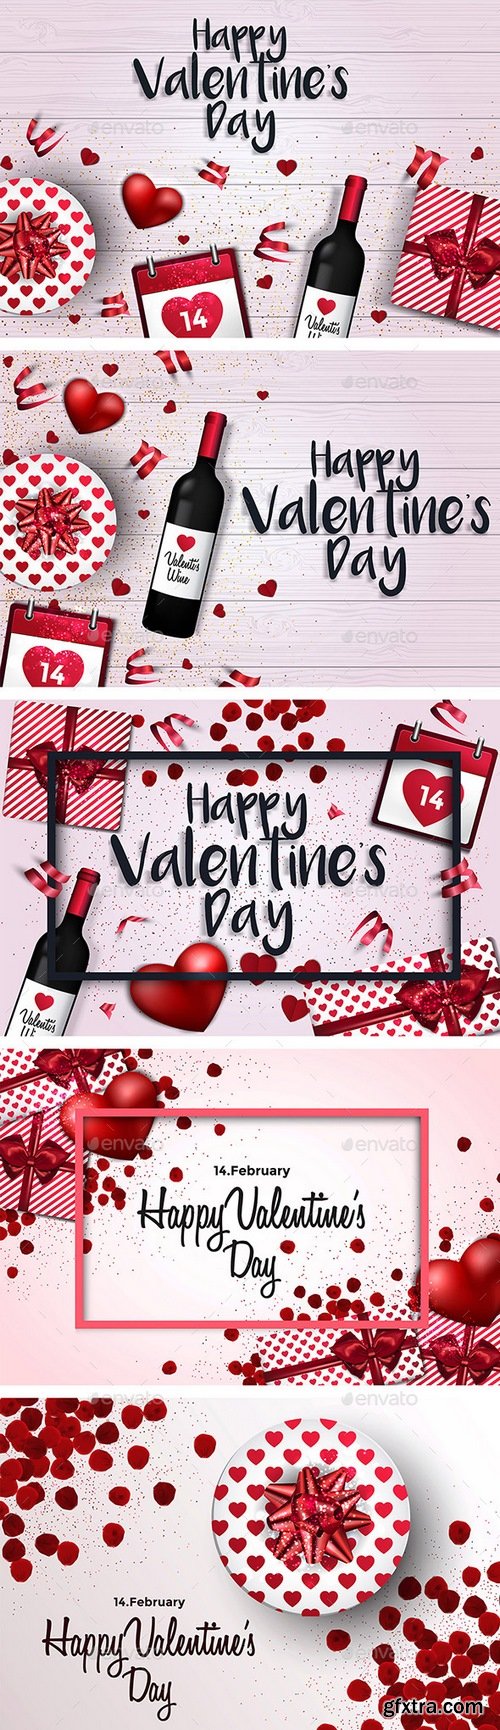 Graphicriver - Set of 5 Trendy Valentines Day Greeting Cards Design 21318779